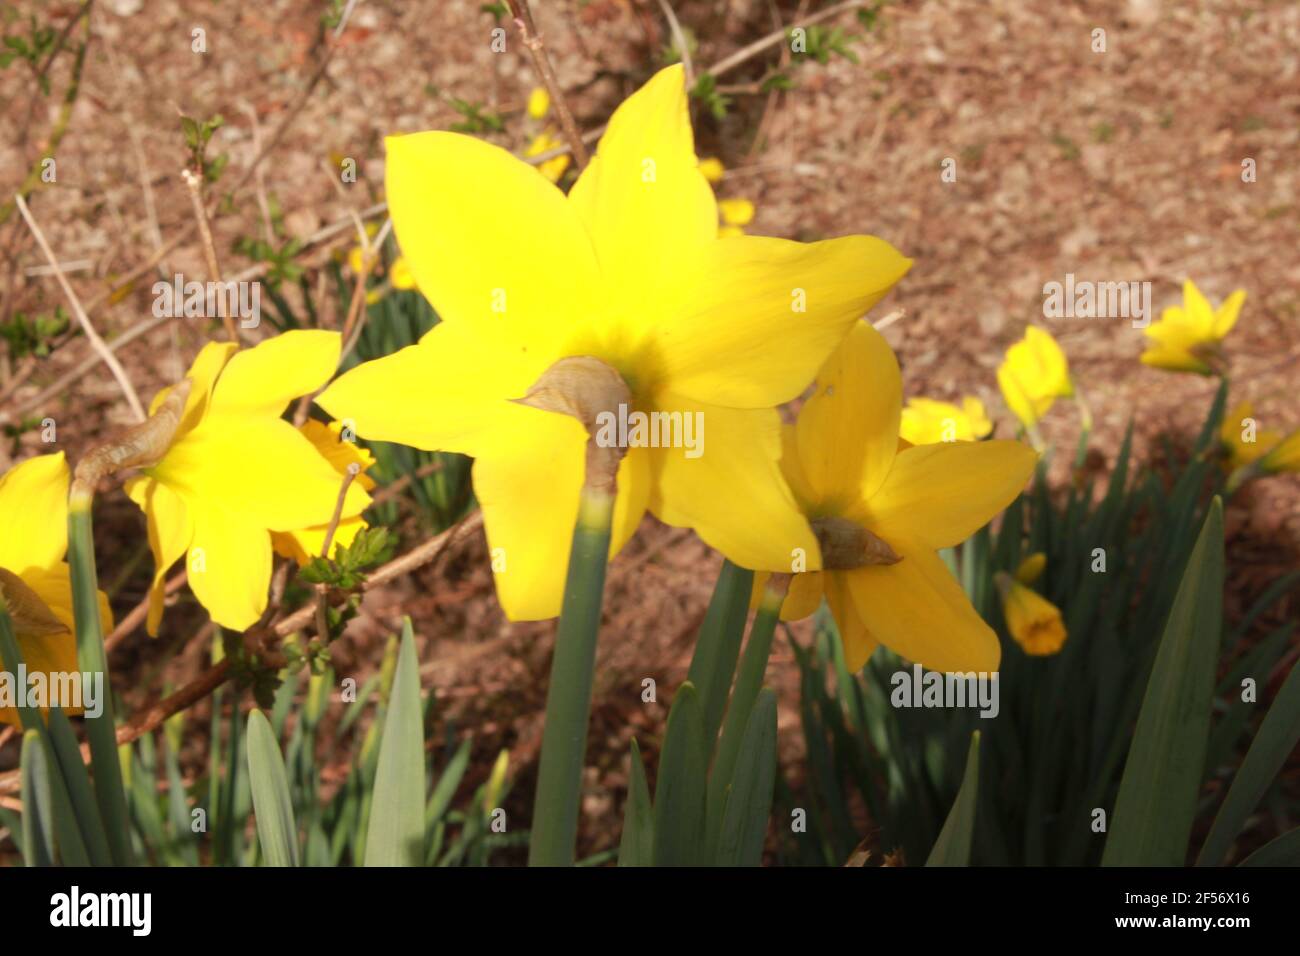 Rear view photograph of Daffodils in a public space. Images of spring and images of Easter. Bright and vibrant yellow spring flowers. Sunny spring day. Stock Photo